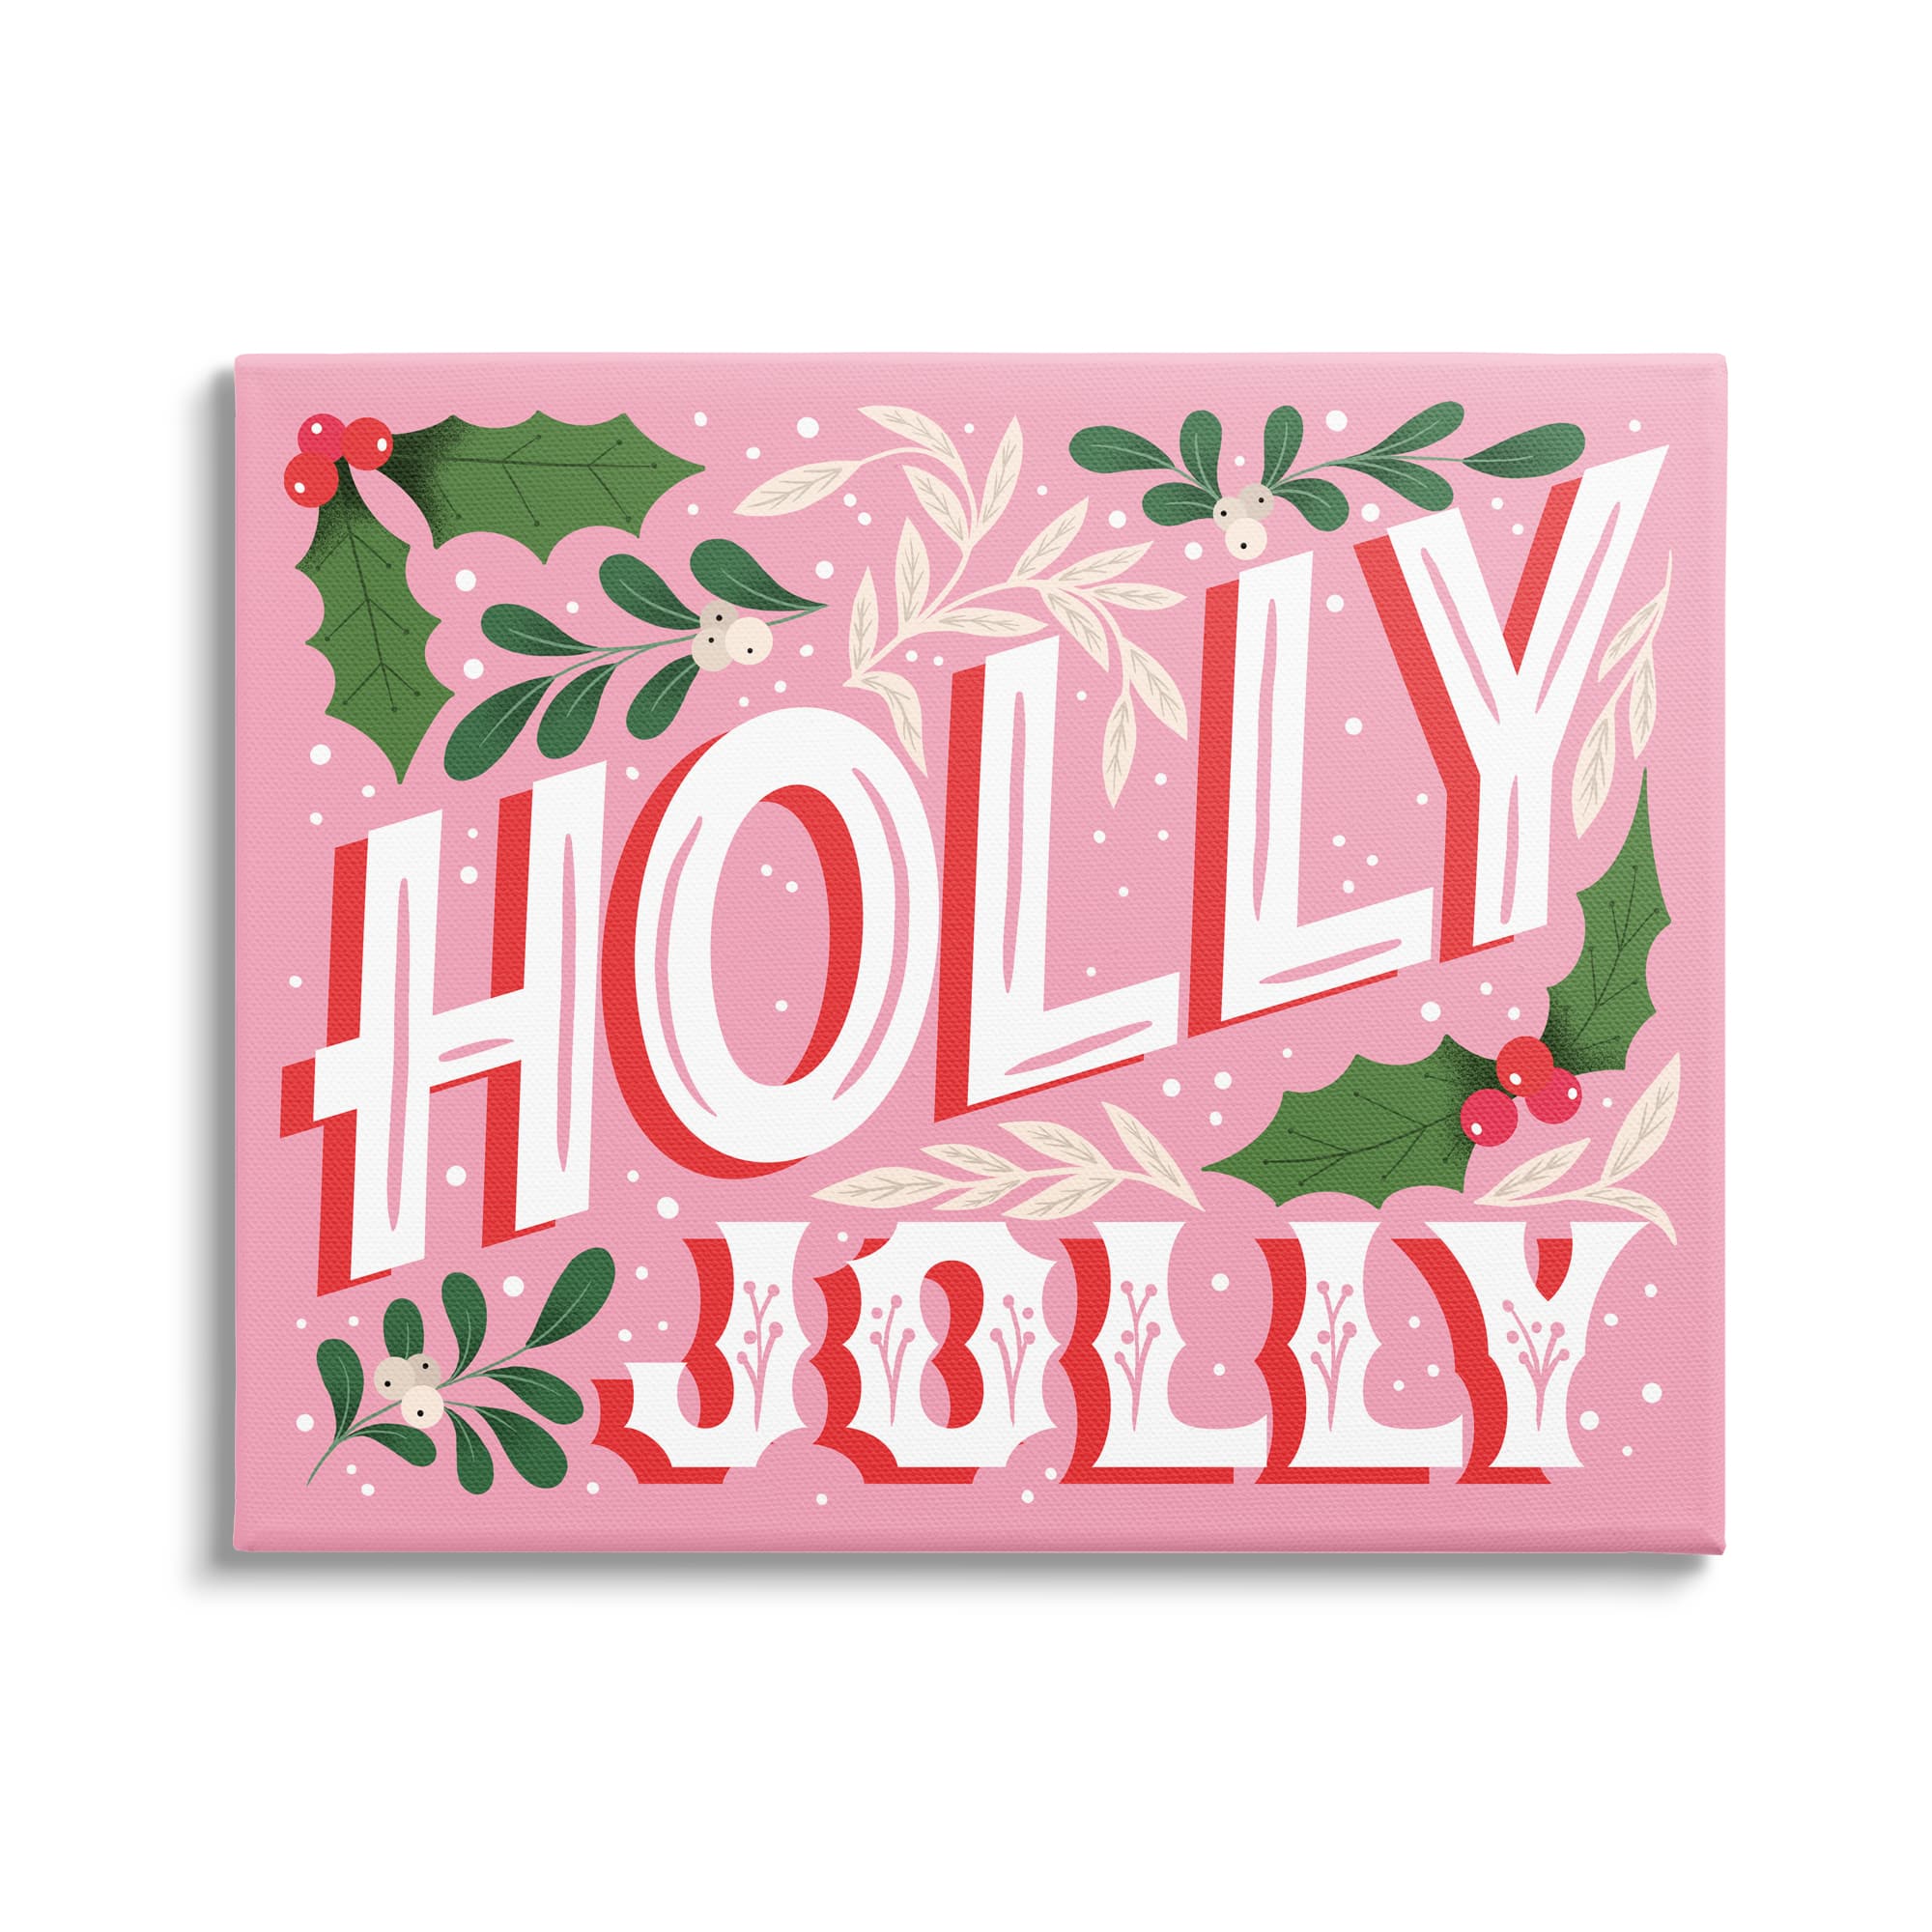 Stupell Industries Bold Pink Holly Jolly Phrase Canvas Wall Art